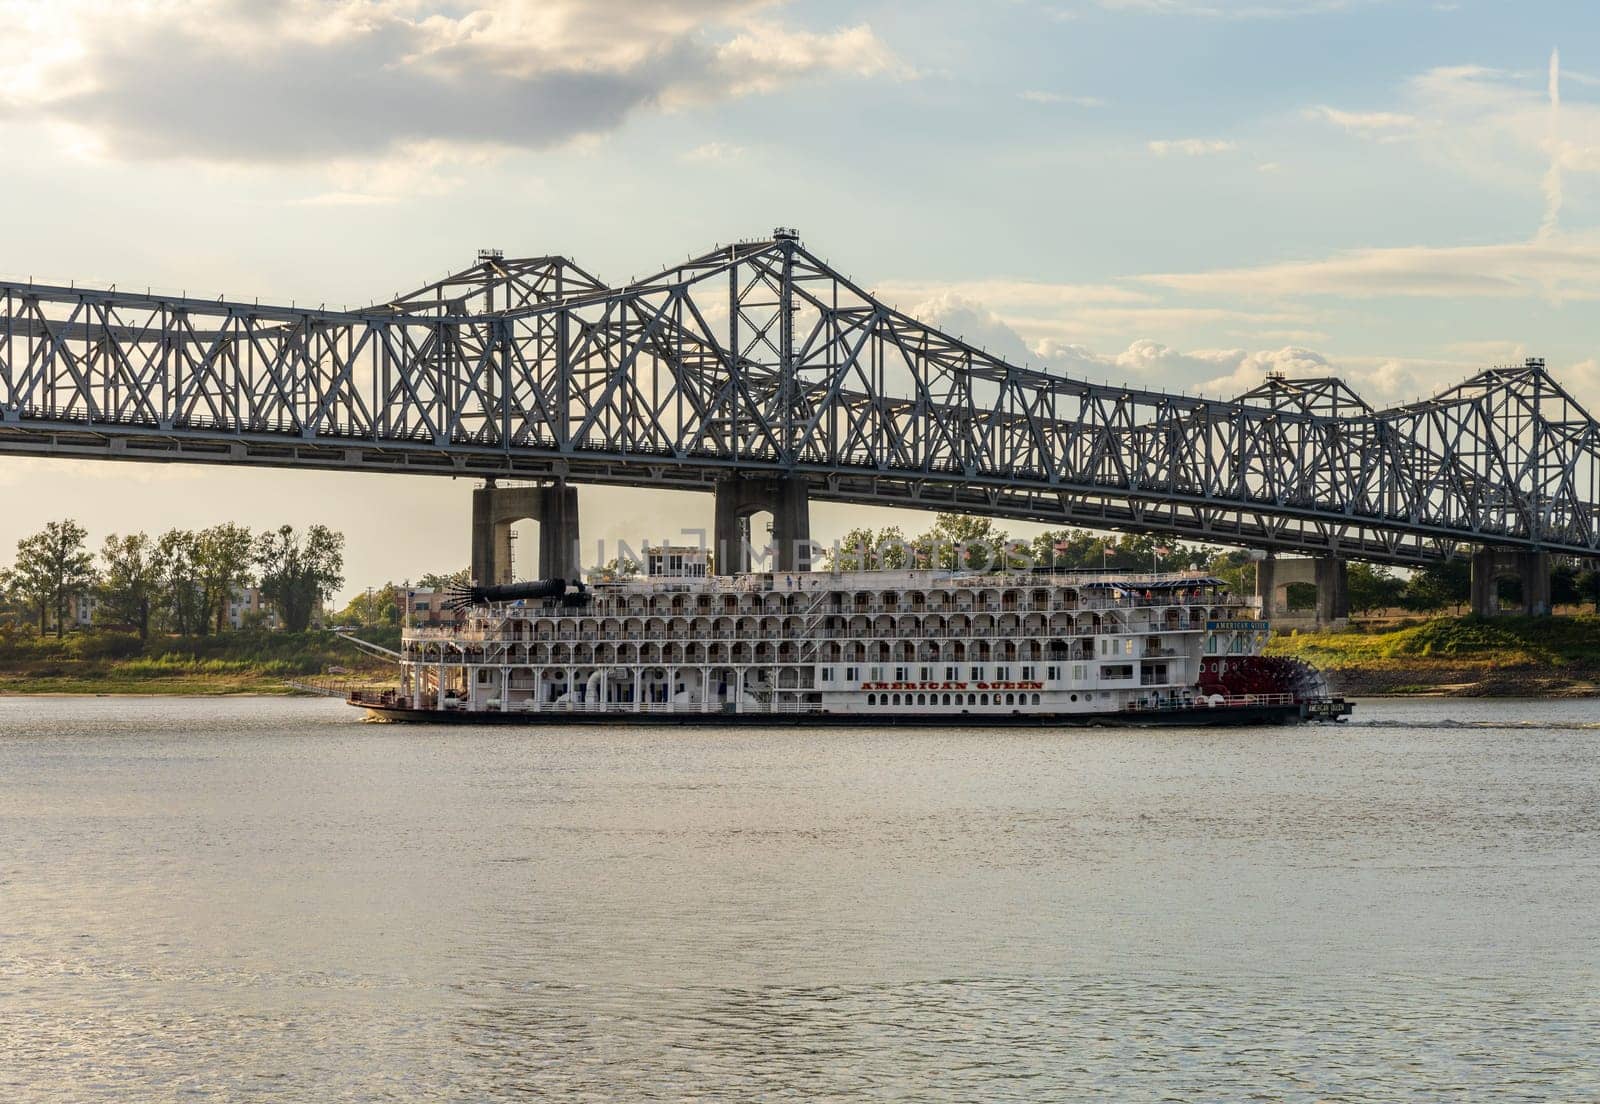 Paddle Steamer American Queen departs from Natchez Mississippi by steheap